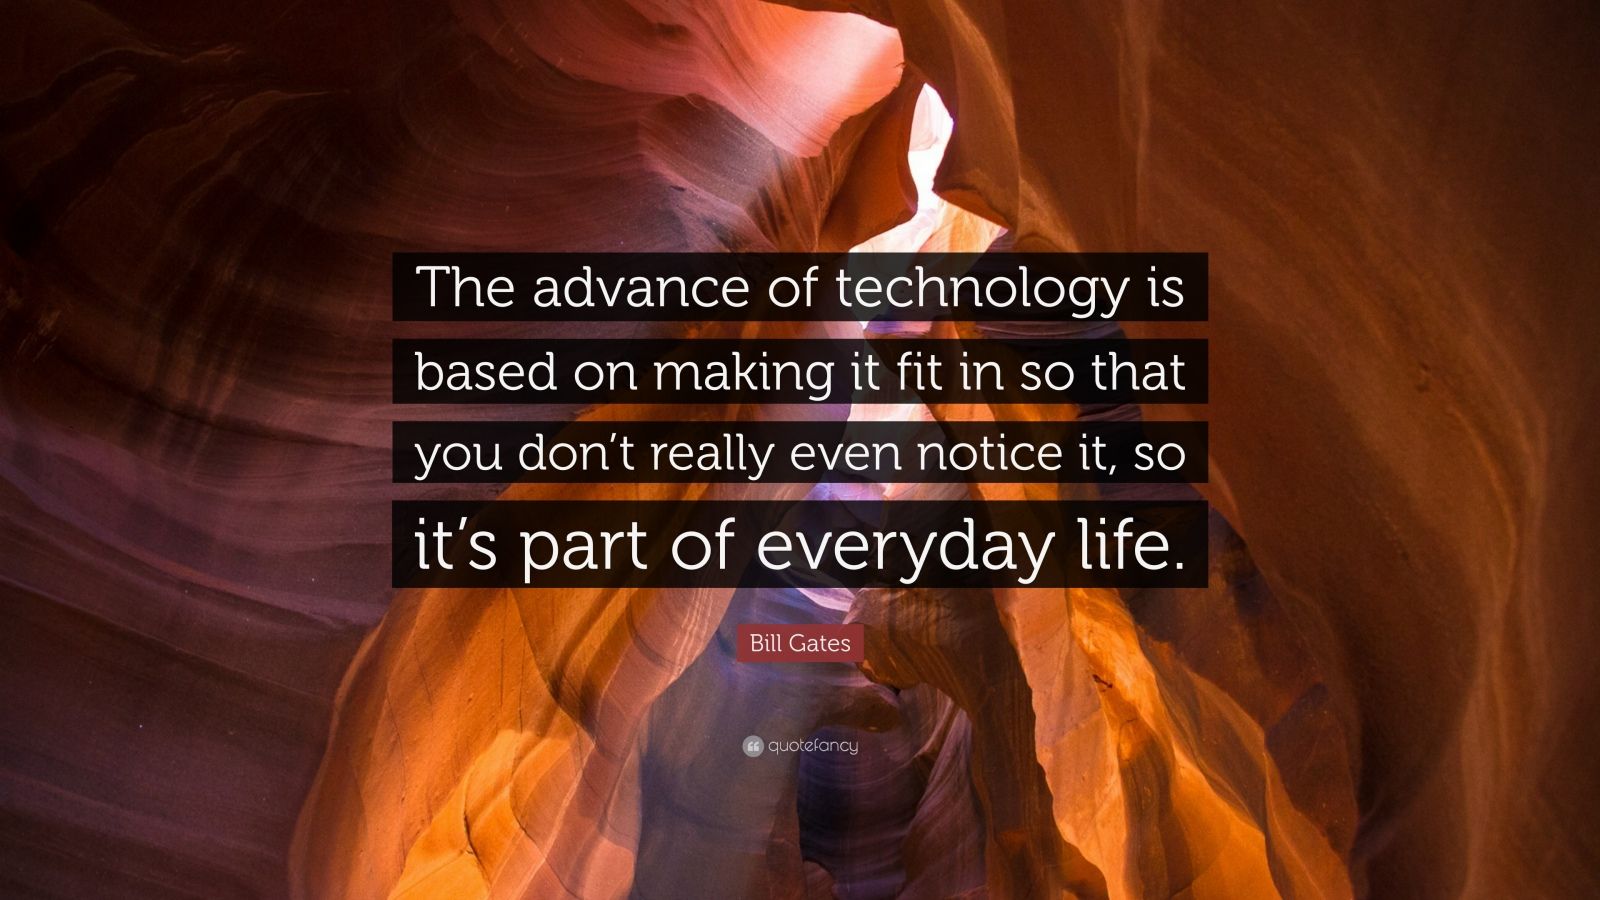 Bill Gates Quote: “The advance of technology is based on making it fit